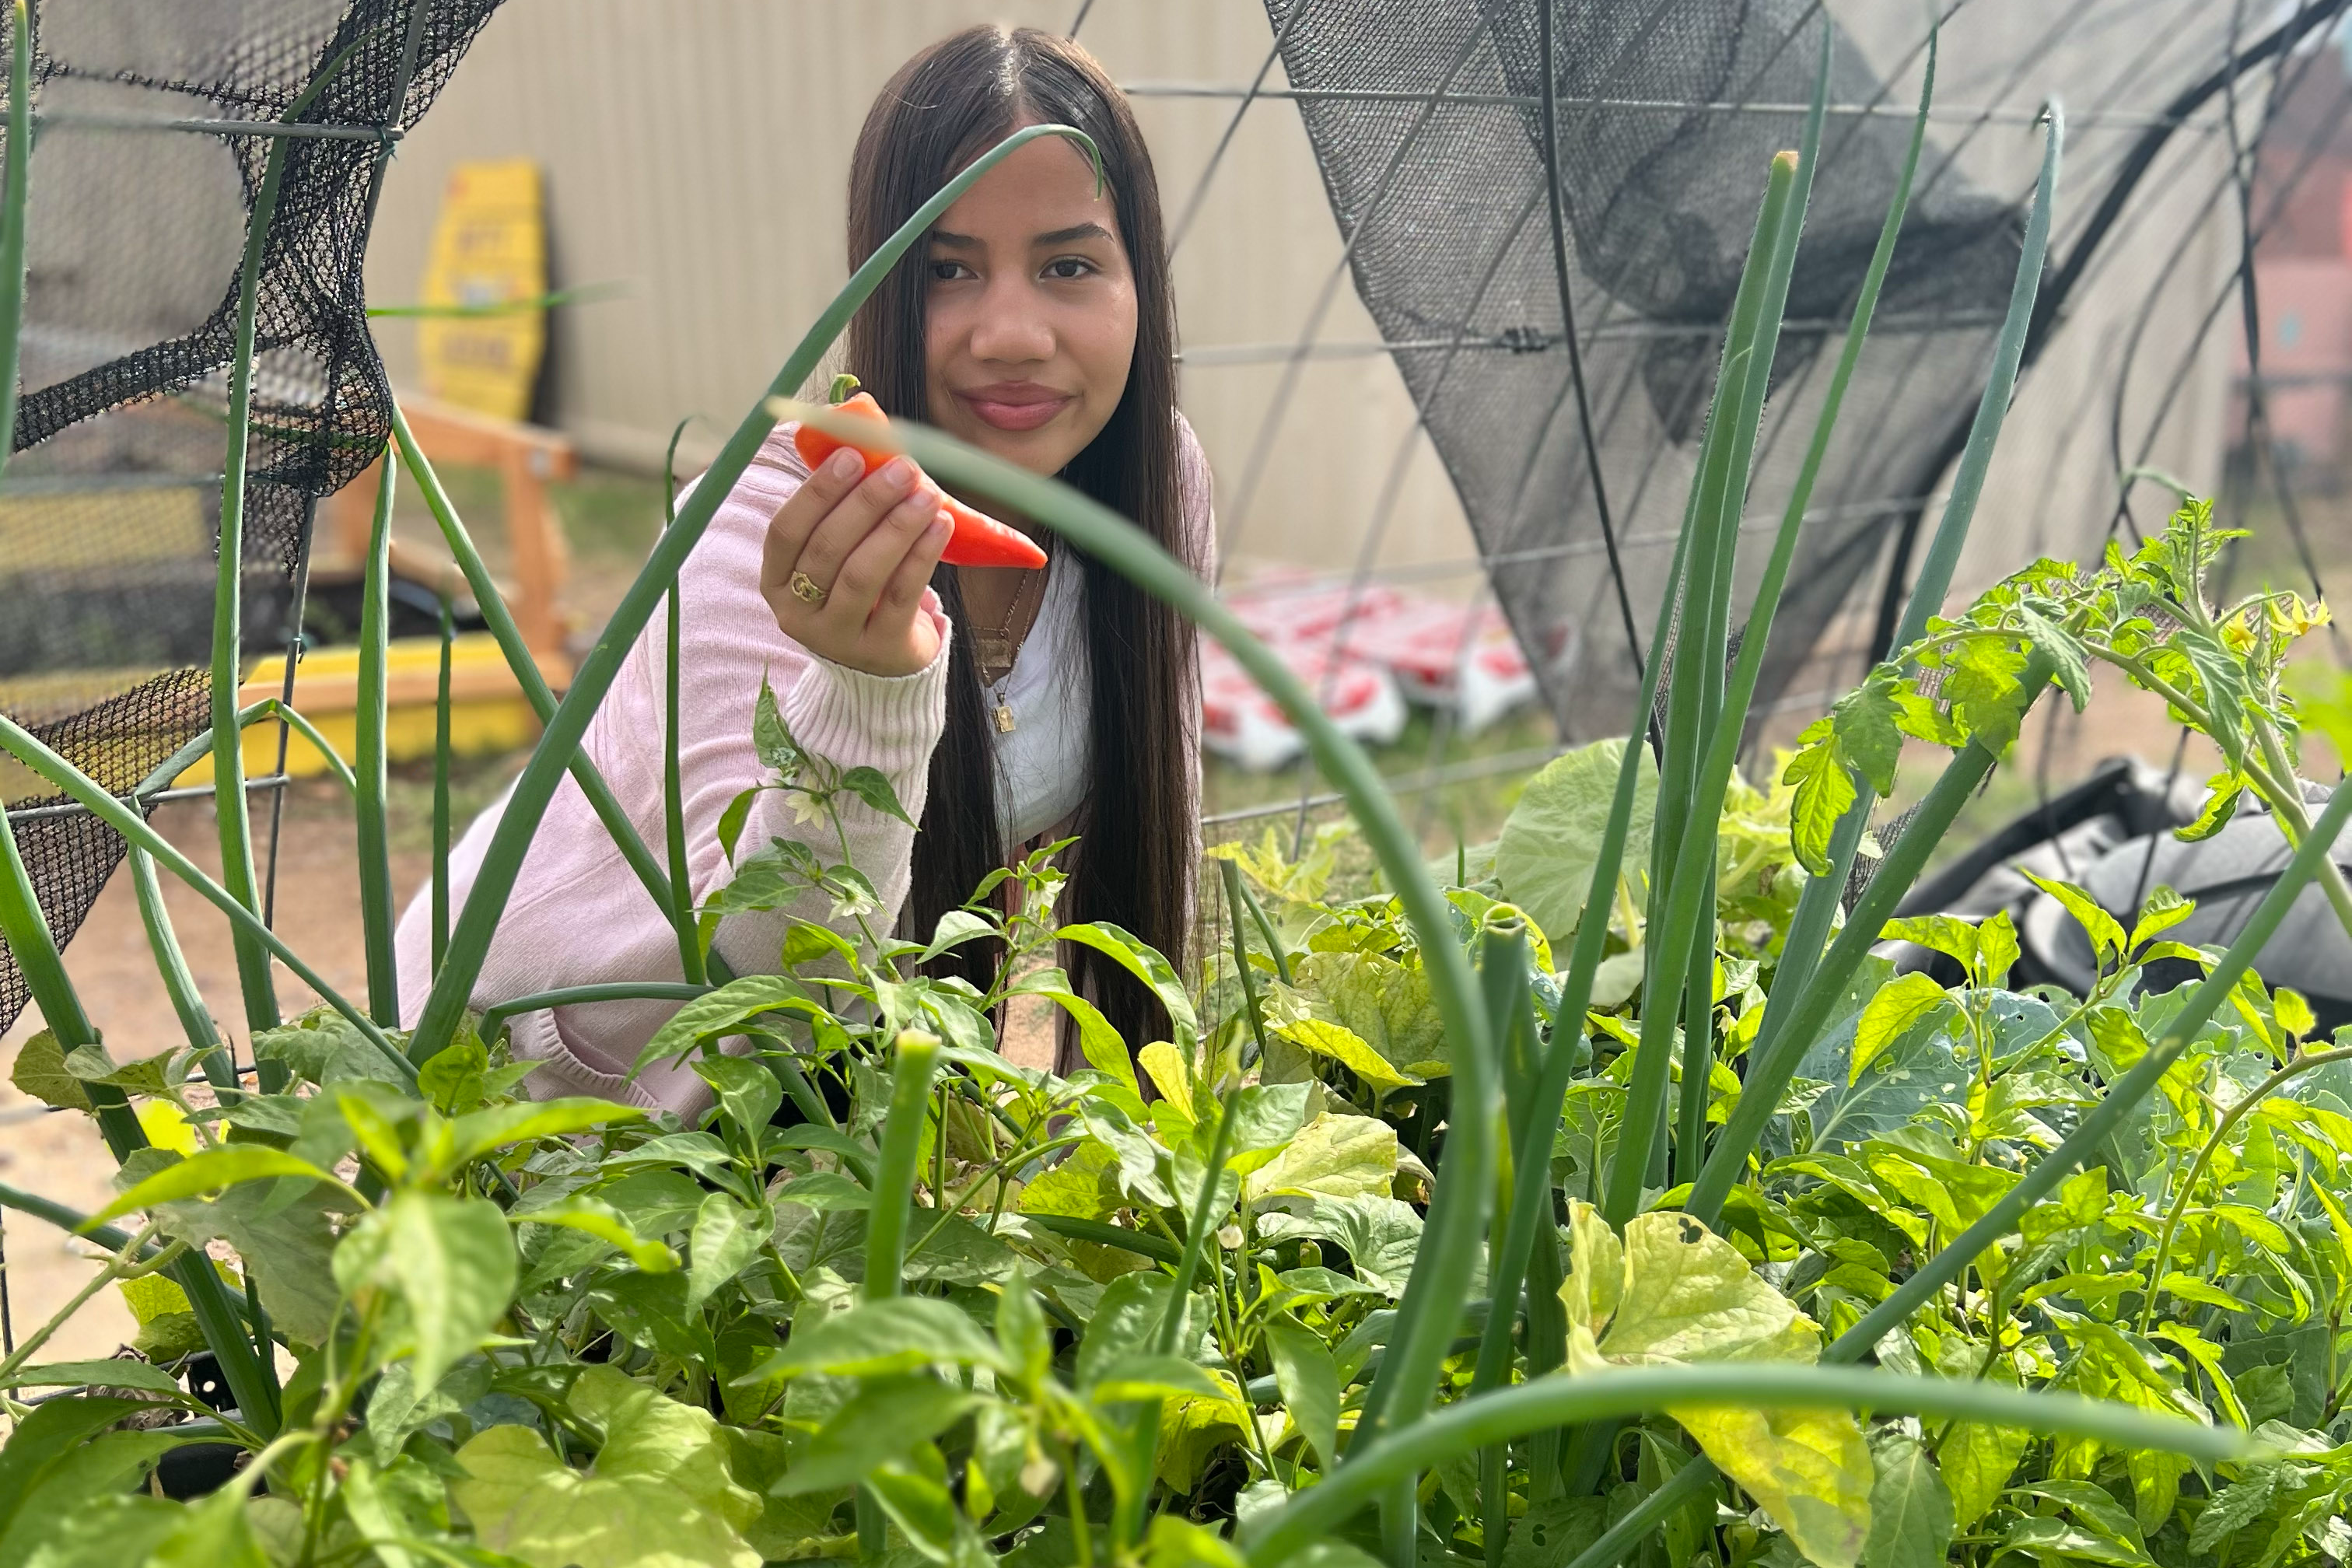 A student poses holding a pepper grown in the school's garden